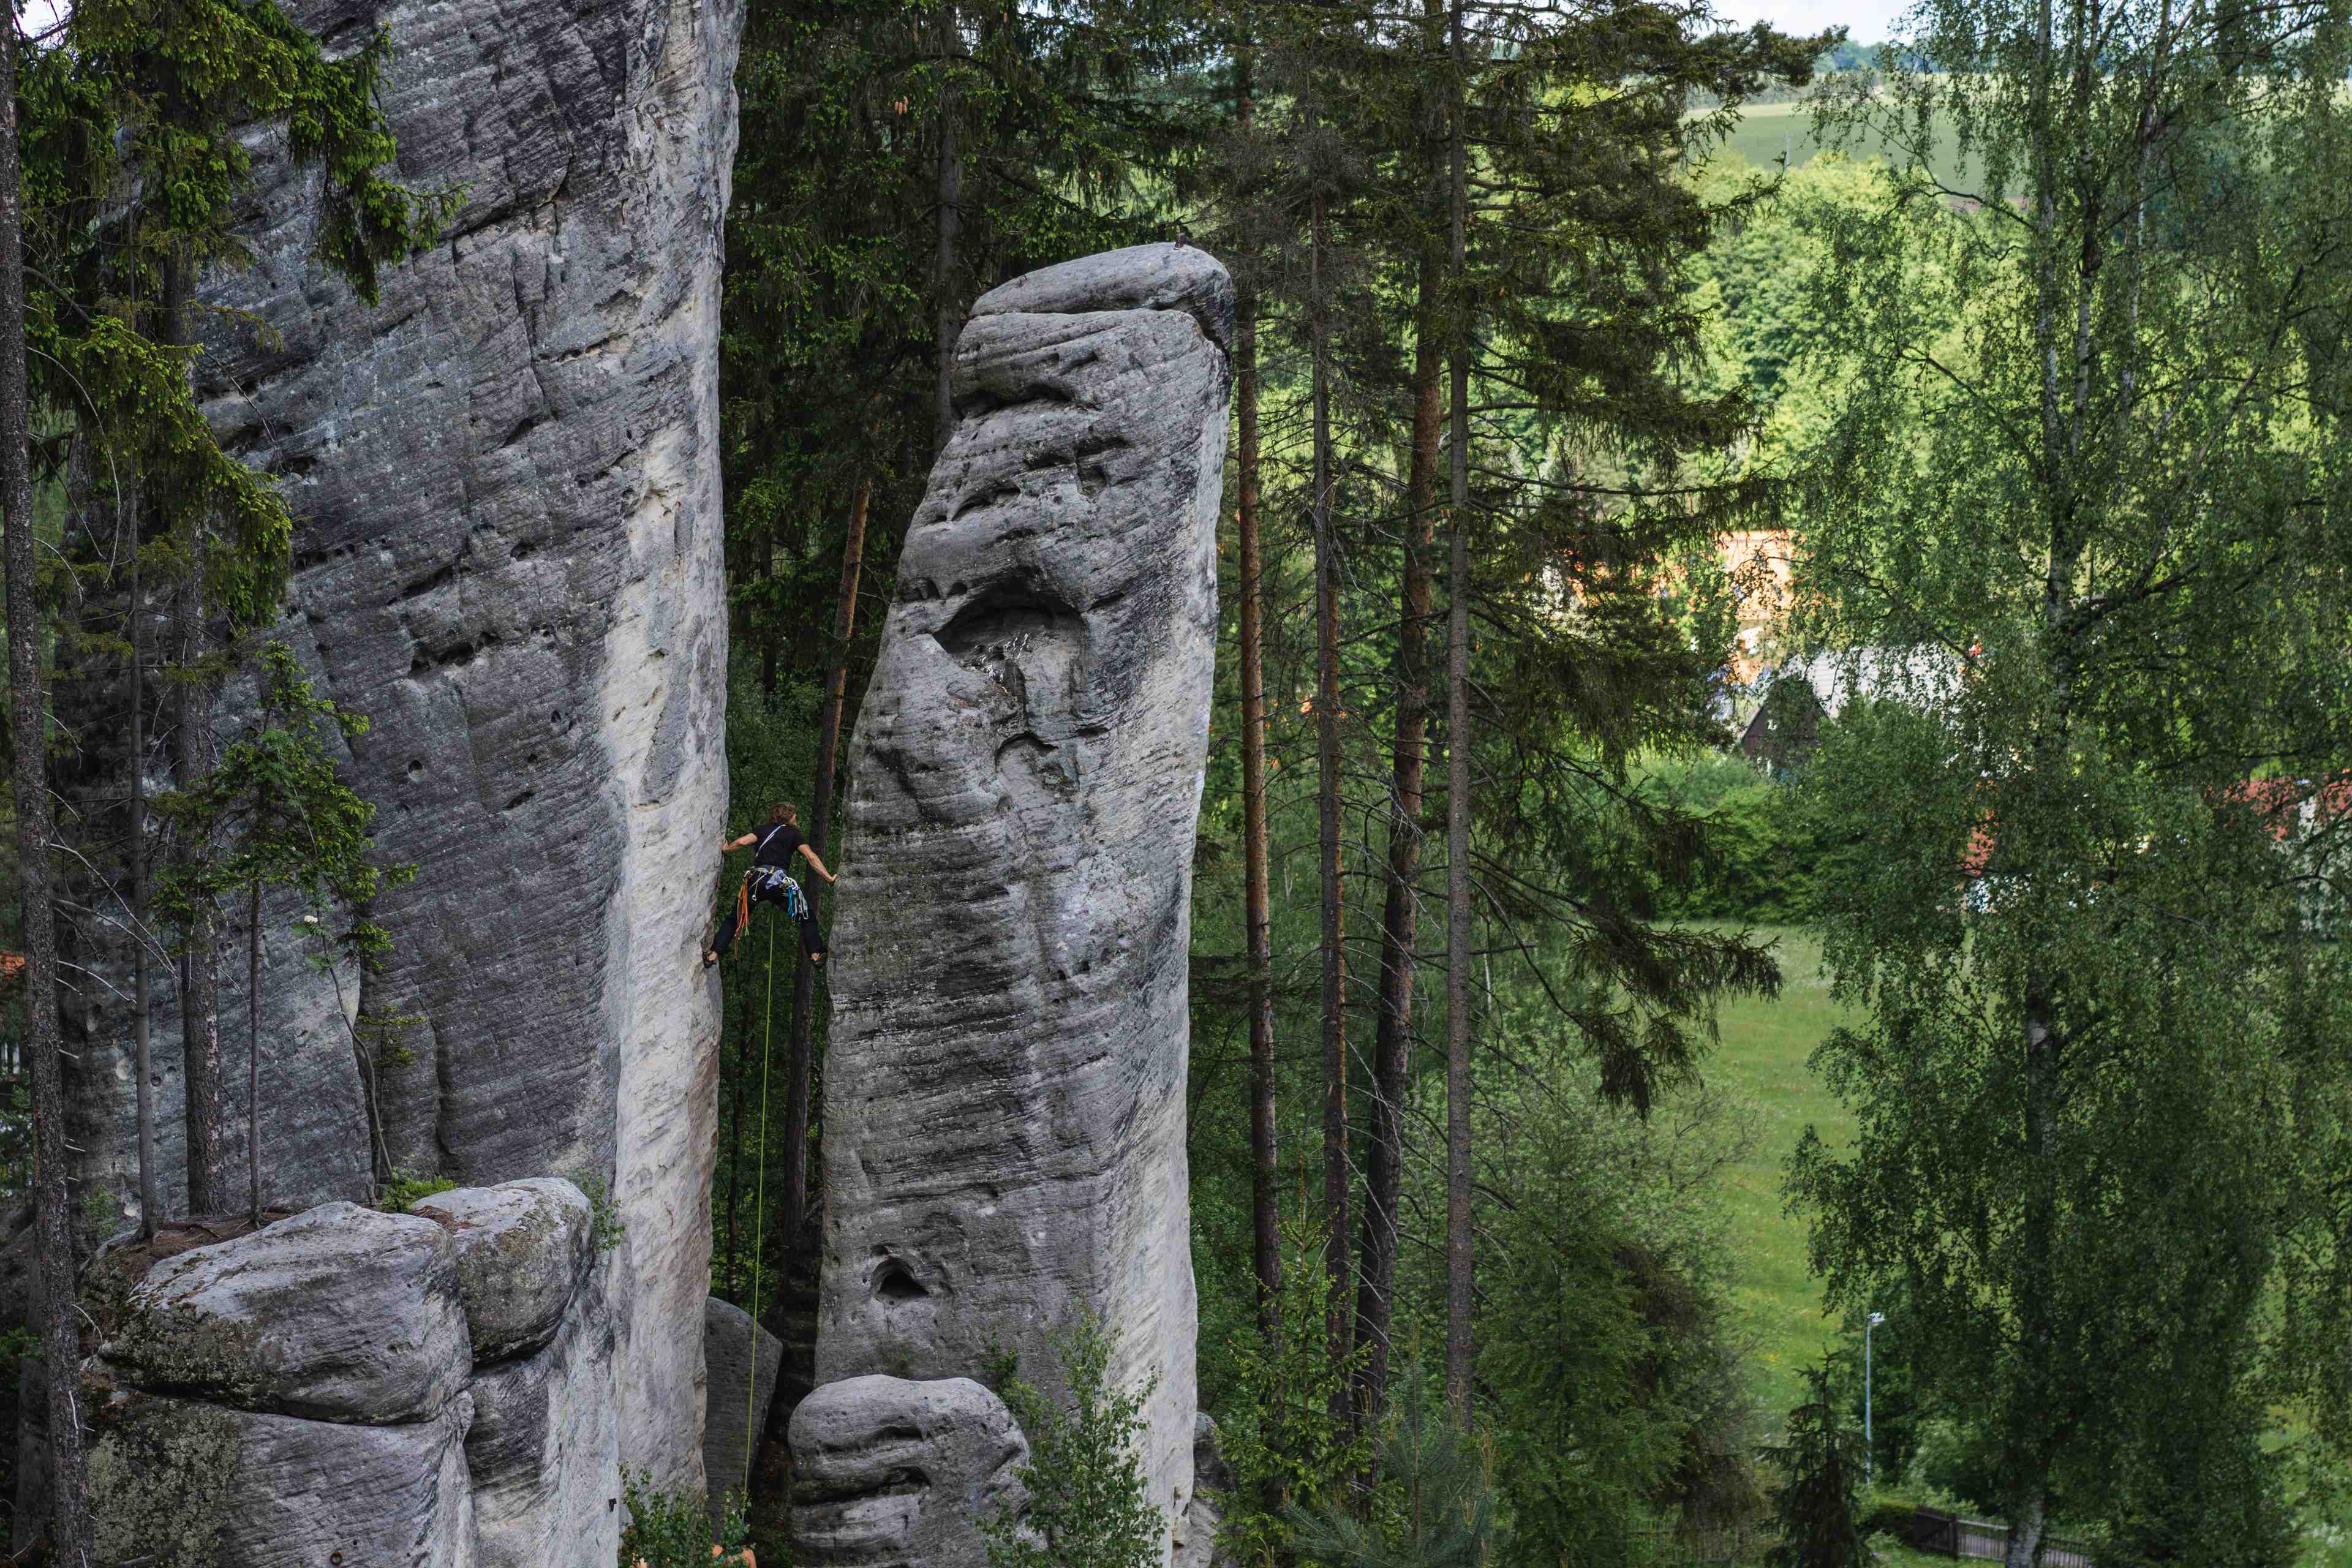 The top 10 Rock Climbing Destinations in Europe